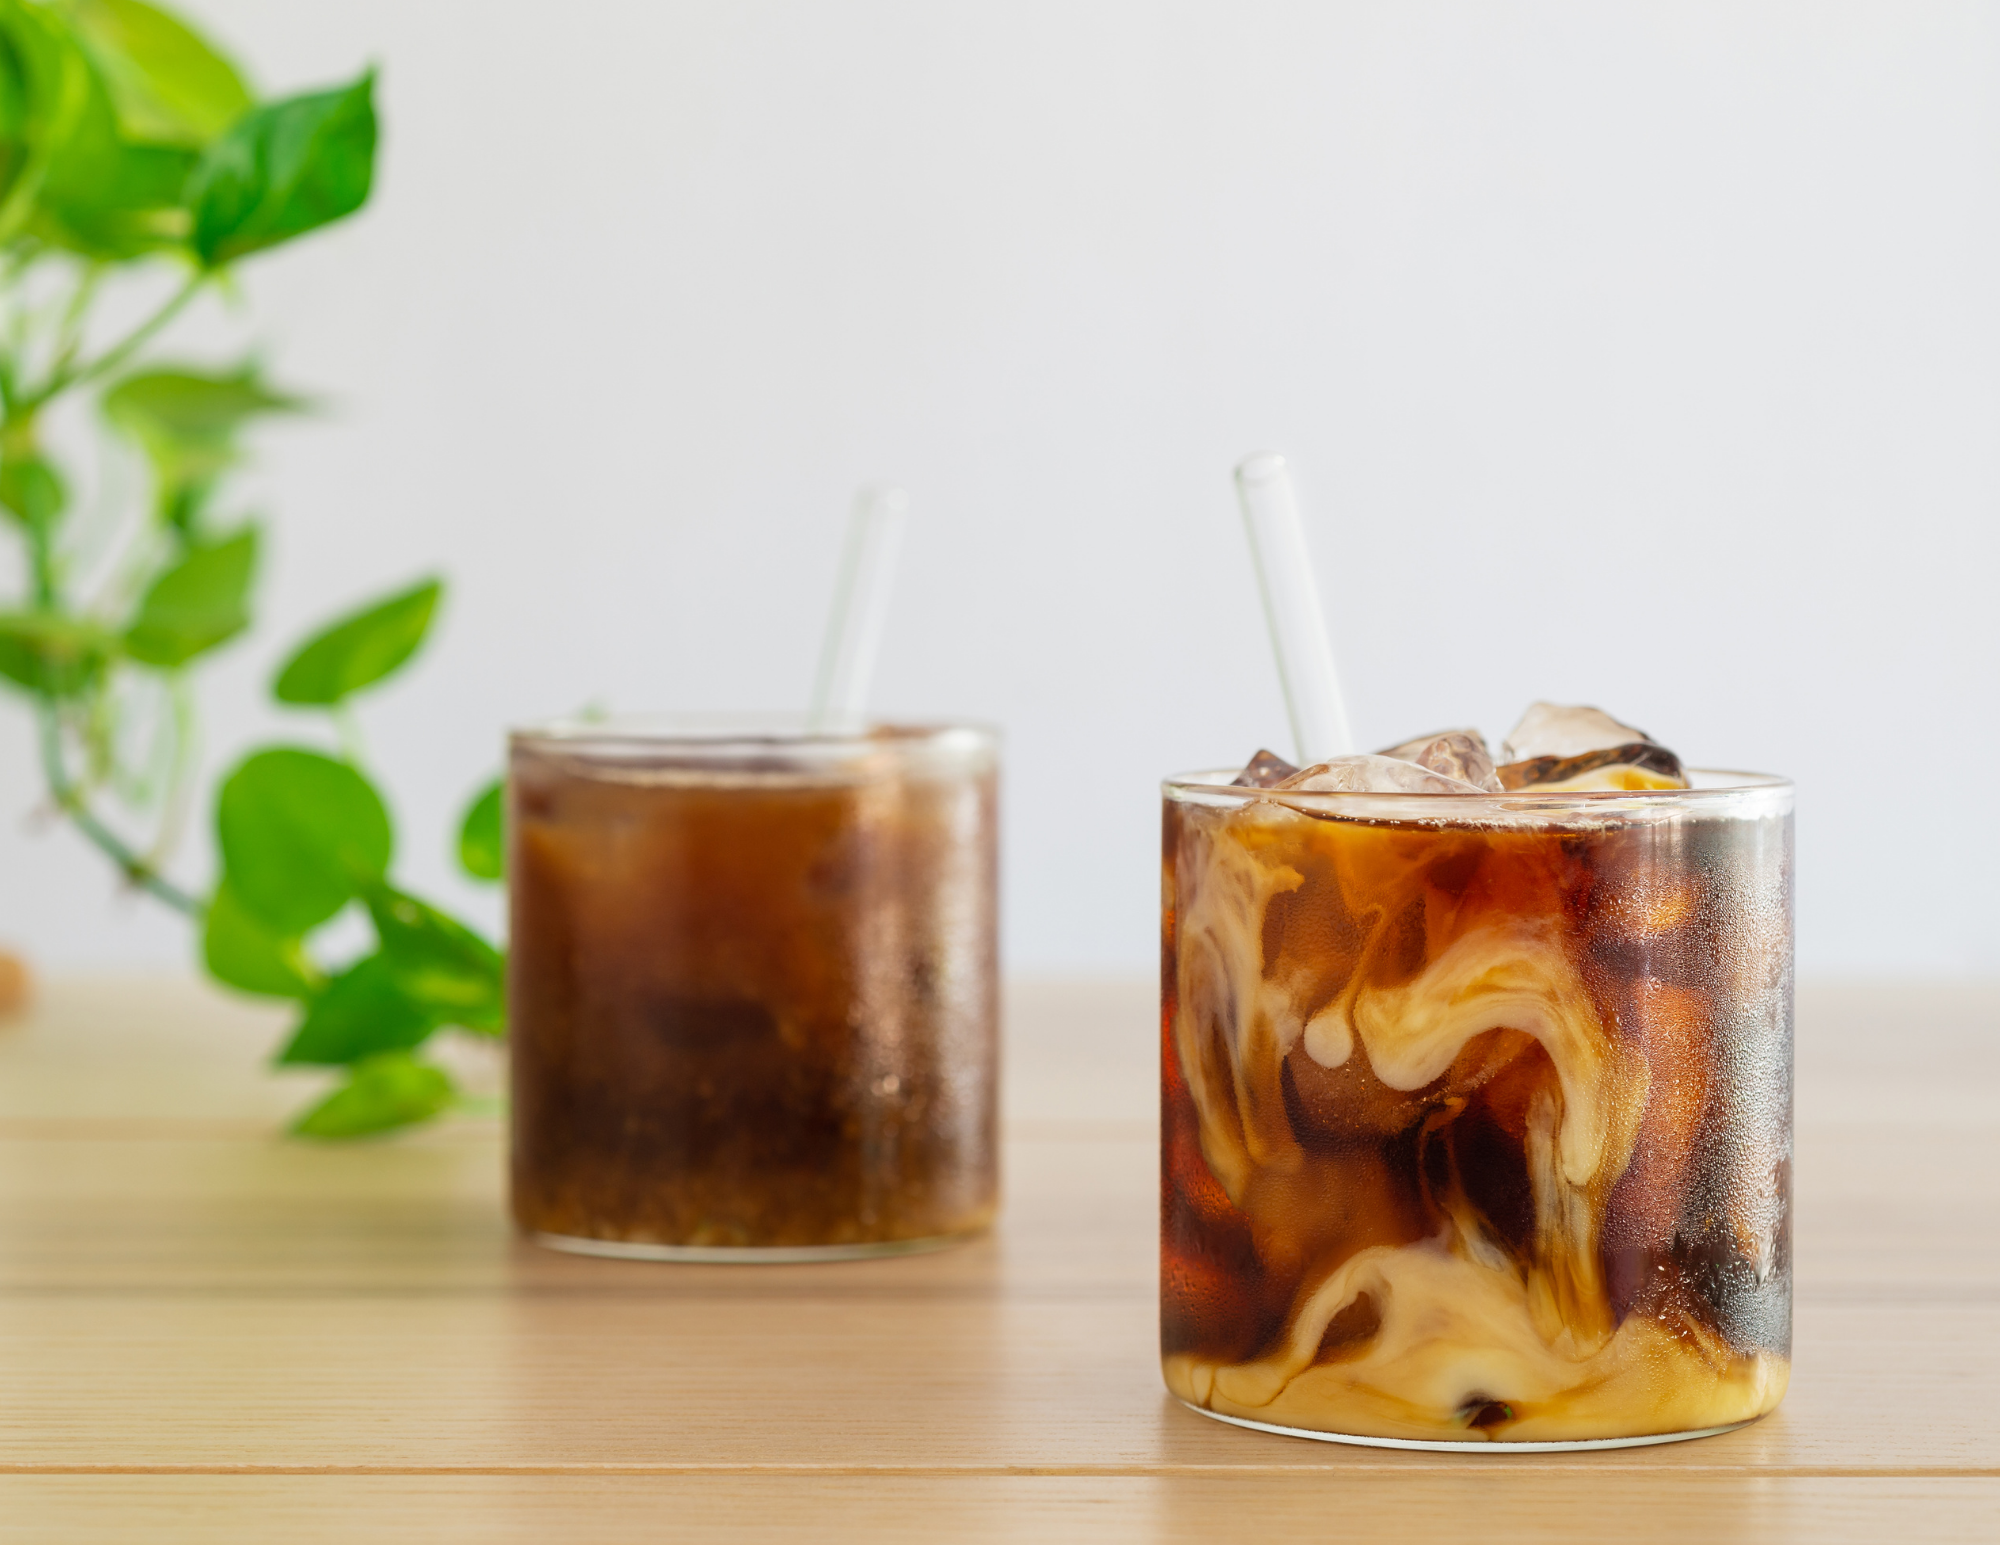 Cold Brew Blend – Yield Coffee Roasters